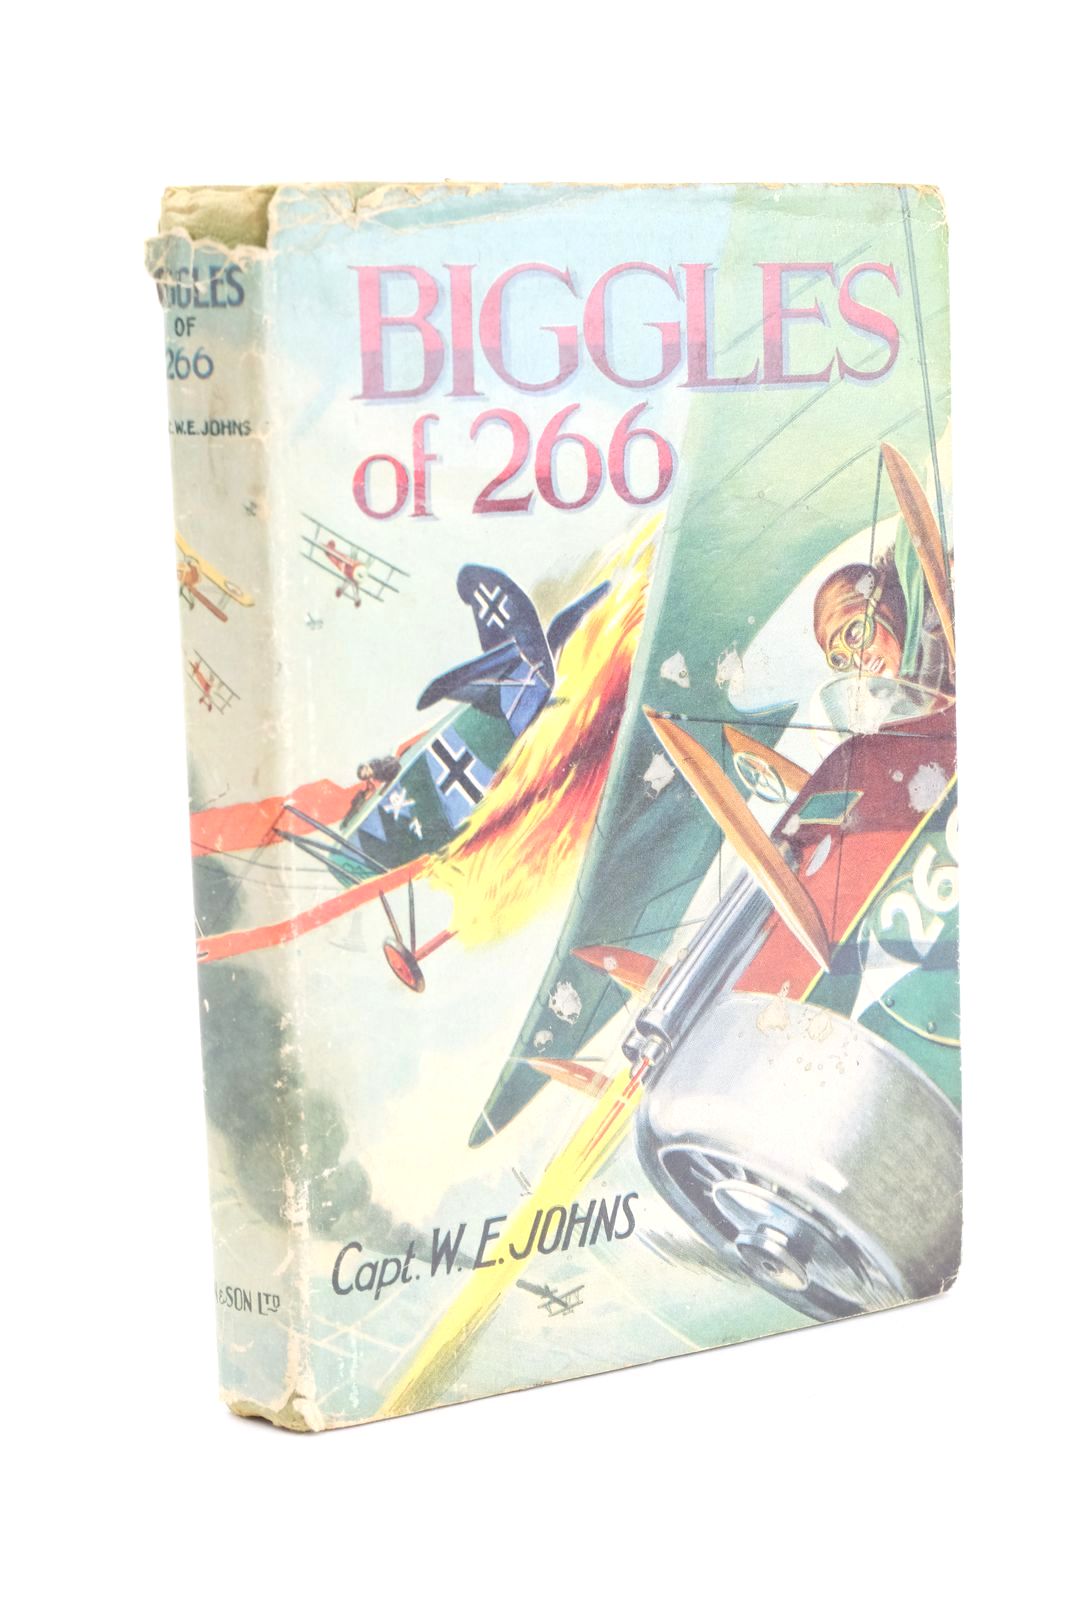 Photo of BIGGLES OF 266- Stock Number: 1323920